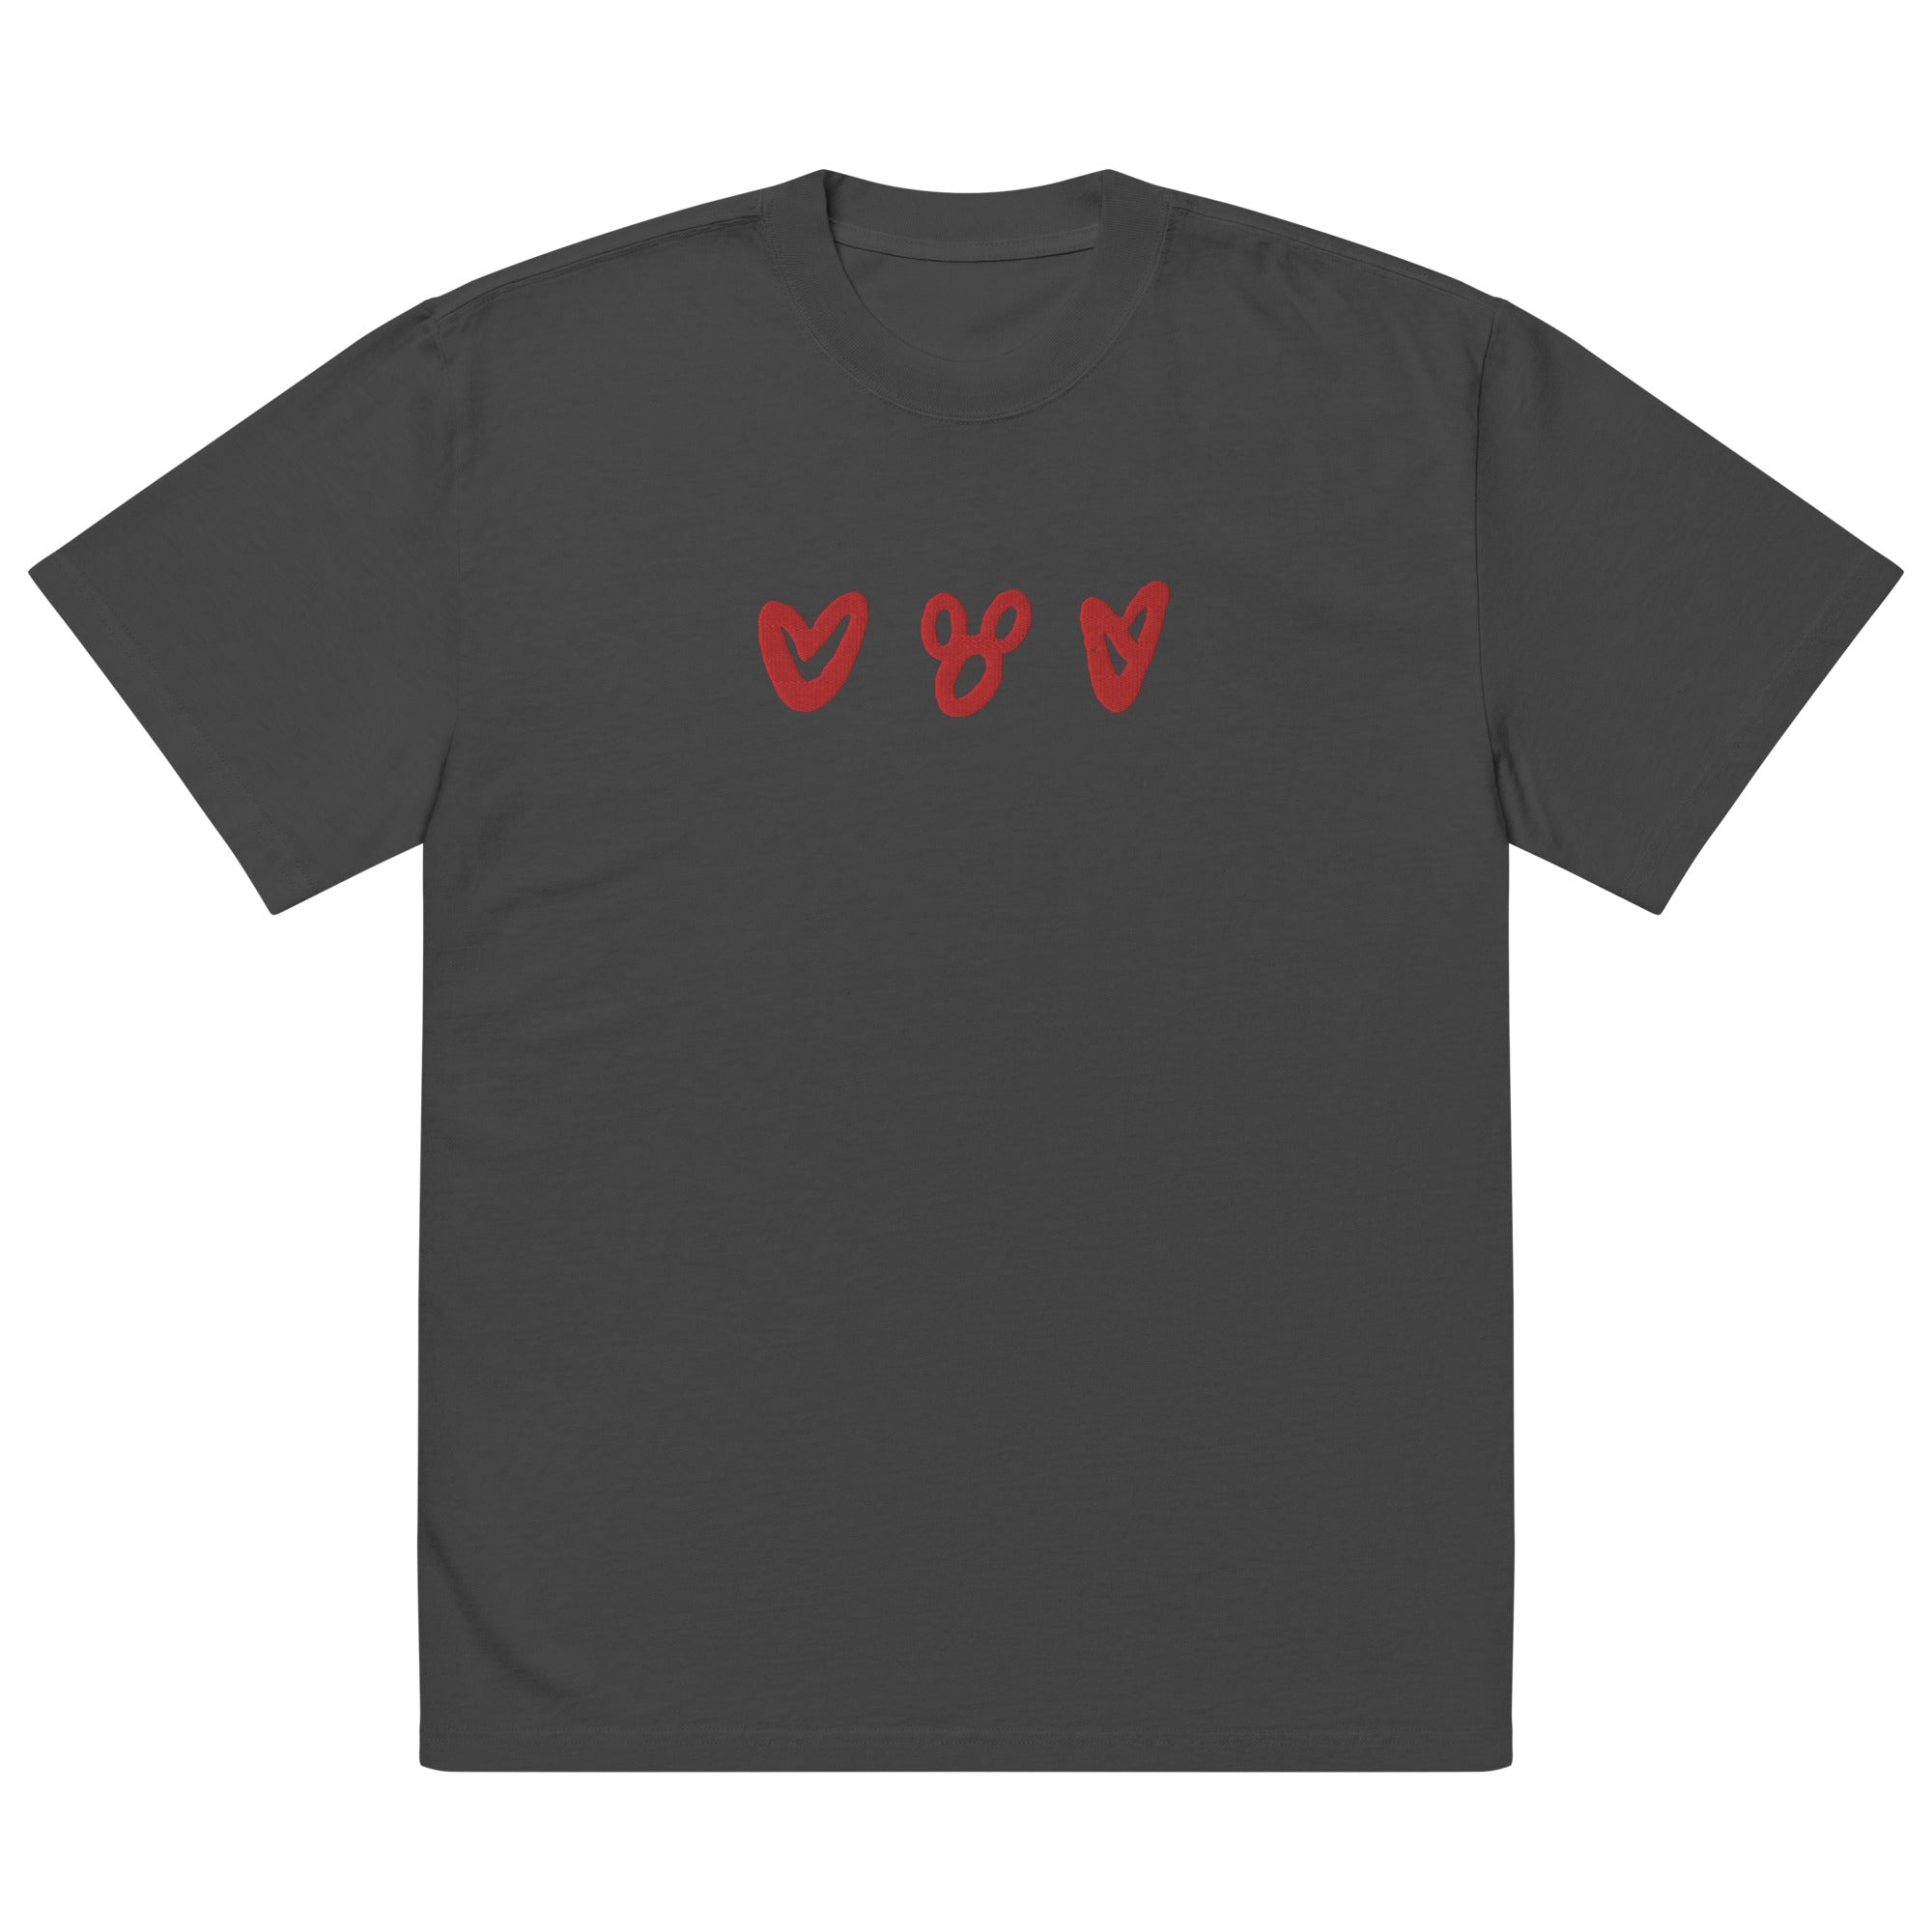 Hearts and Mickey EMBROIDERED T-Shirt Disney Valentines Day Hearts Heavy Weight Faded T-Shirt